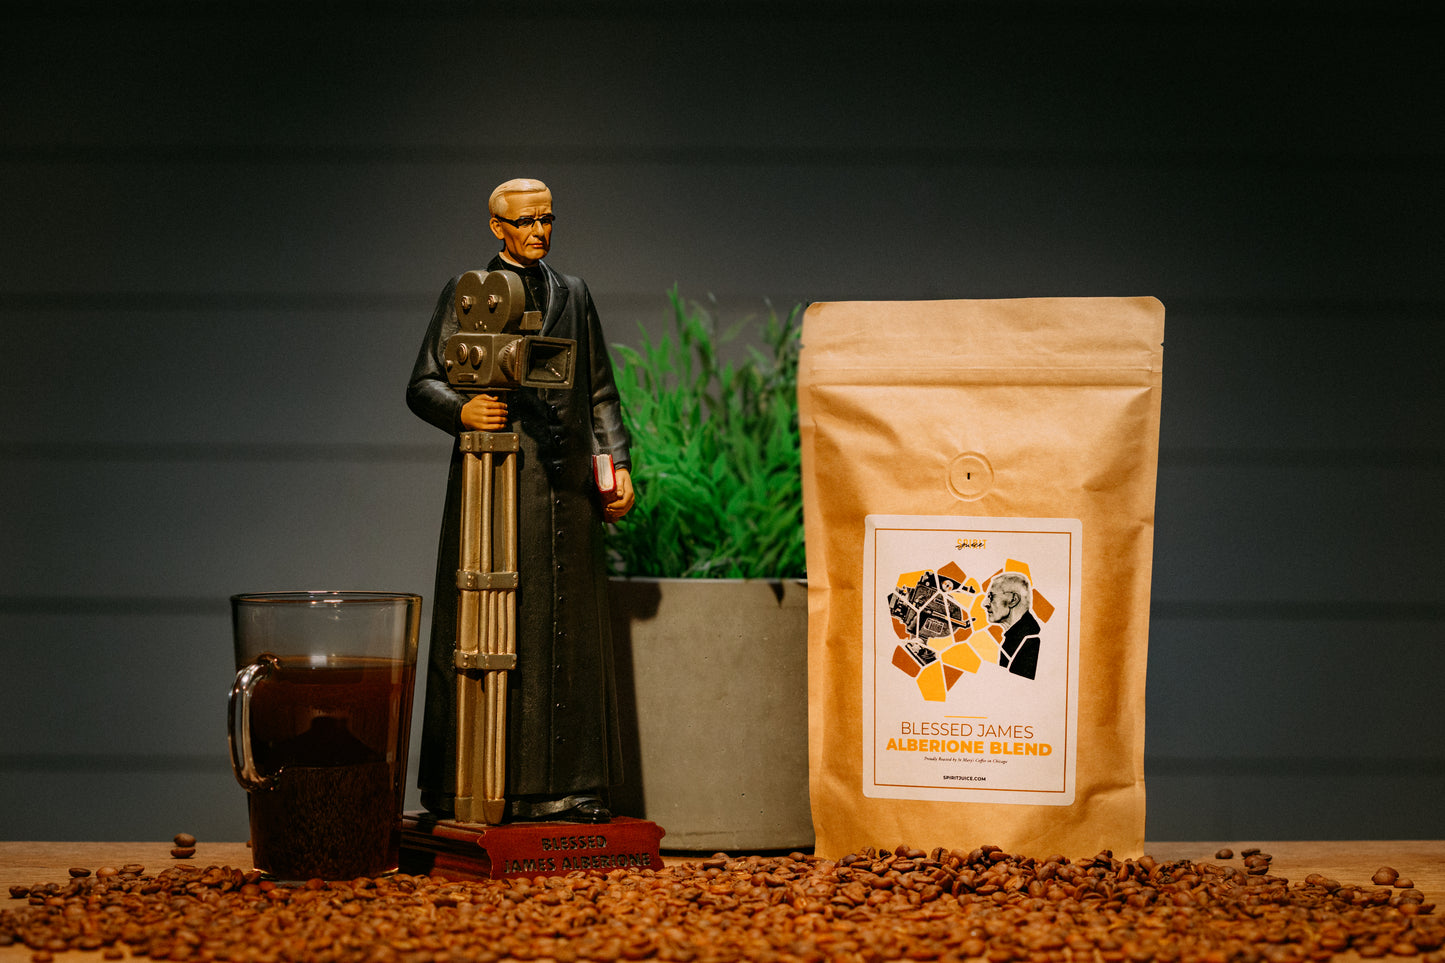 
                  
                    blessed james alberione blend coffee from spirit juice studios and st saint Mary coffee Chicago medium roast online store merchandise goods services video production catholic
                  
                